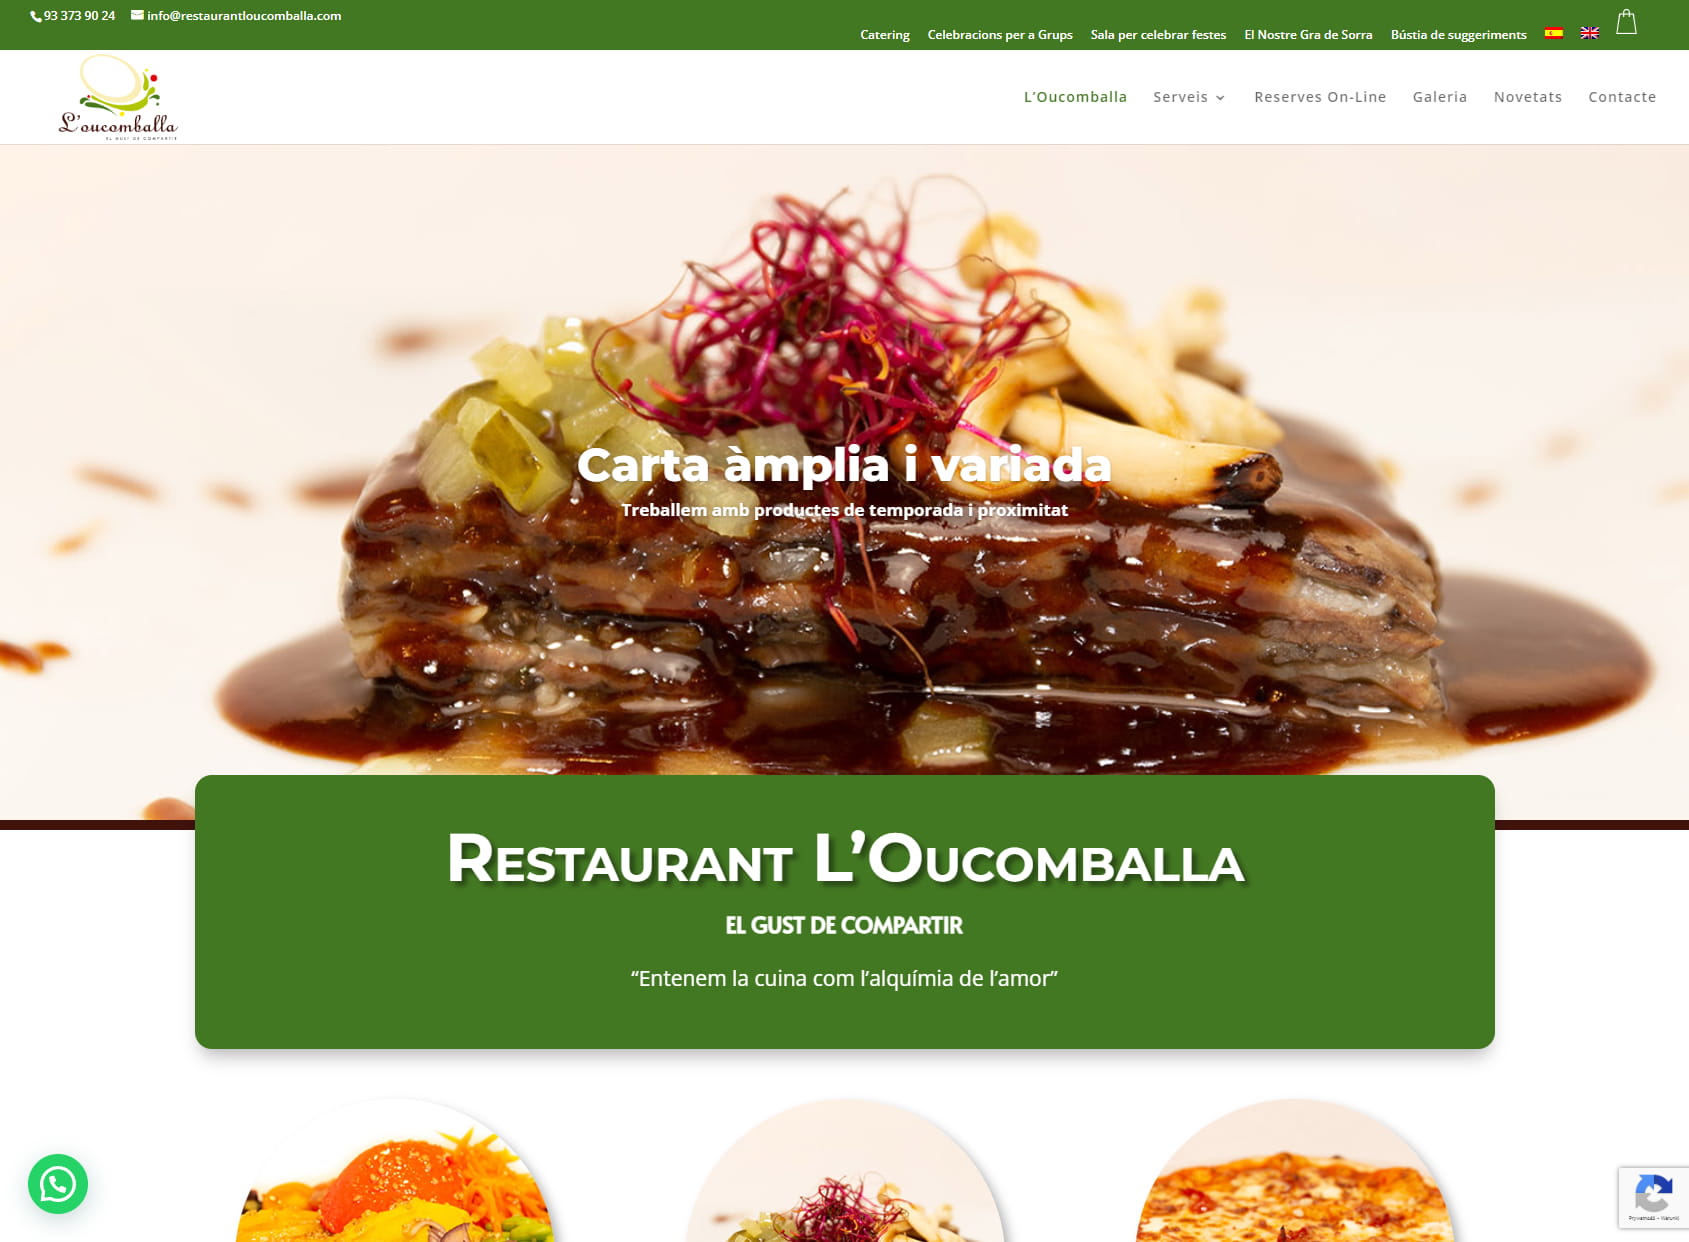 Restaurant L'Oucomballa